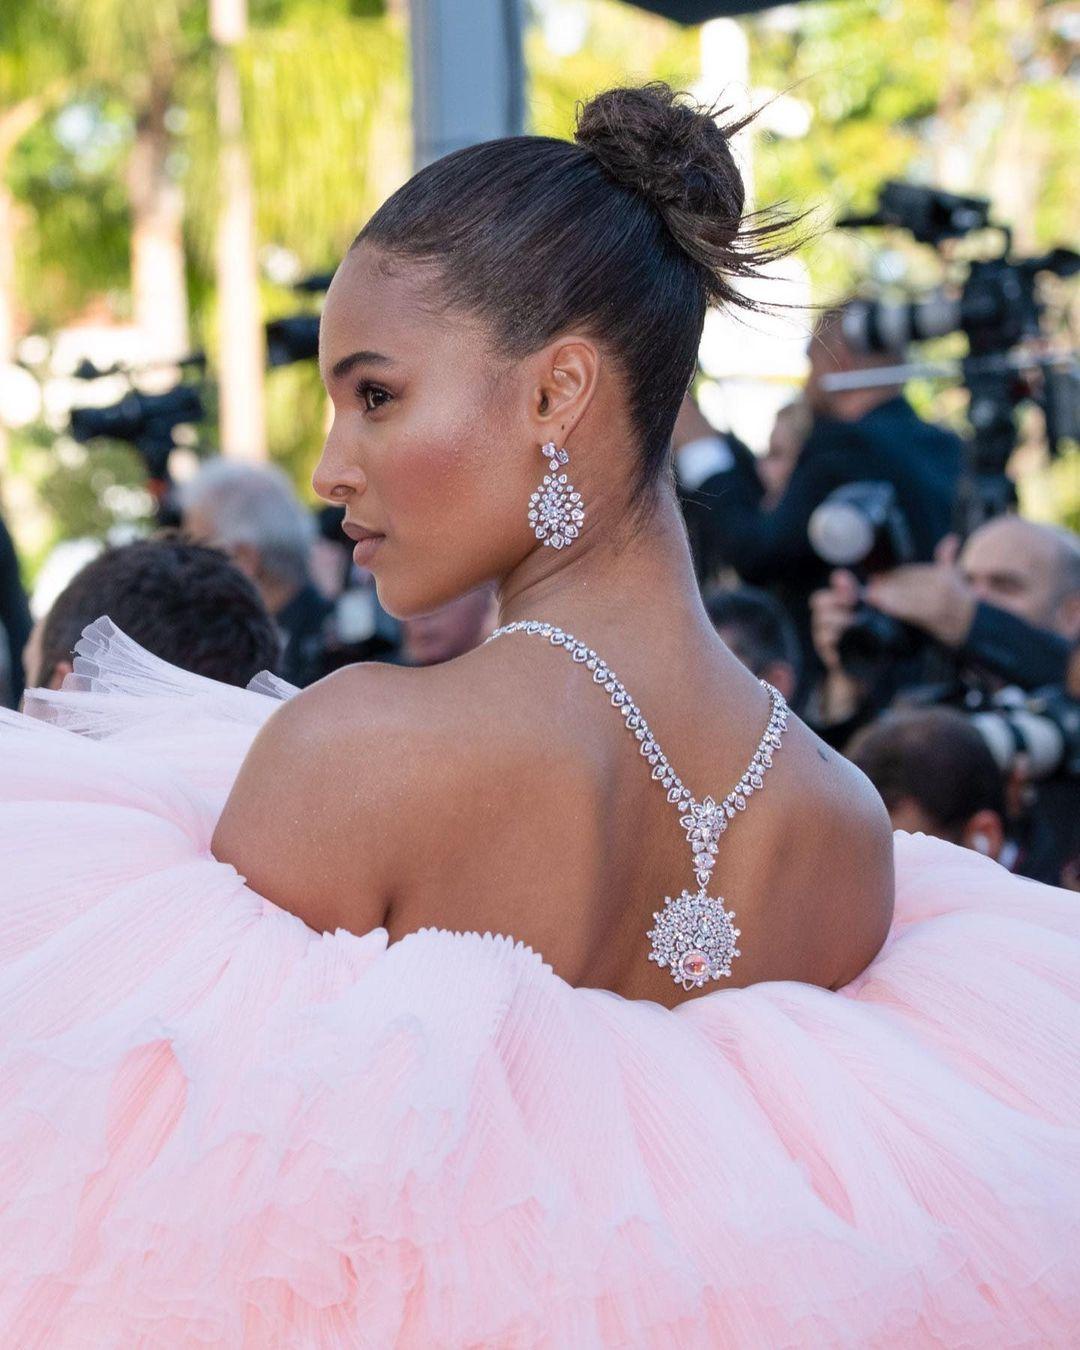 
 With the 2022 #Cannes Film Festival now well underway, the stars have been going all out and accessorising their couture gowns with a dazzling array of gemstones to walk the red carpet.

As befits the glamorous scenery of the French Riviera, decadent earrings and necklaces have been the order of the day, with eye-catching diamonds, emeralds and rubies all ensuring their wearers a place in the spotlight. At the link in our bio, we round up the very best jewellery looks from the festival so far. 
 